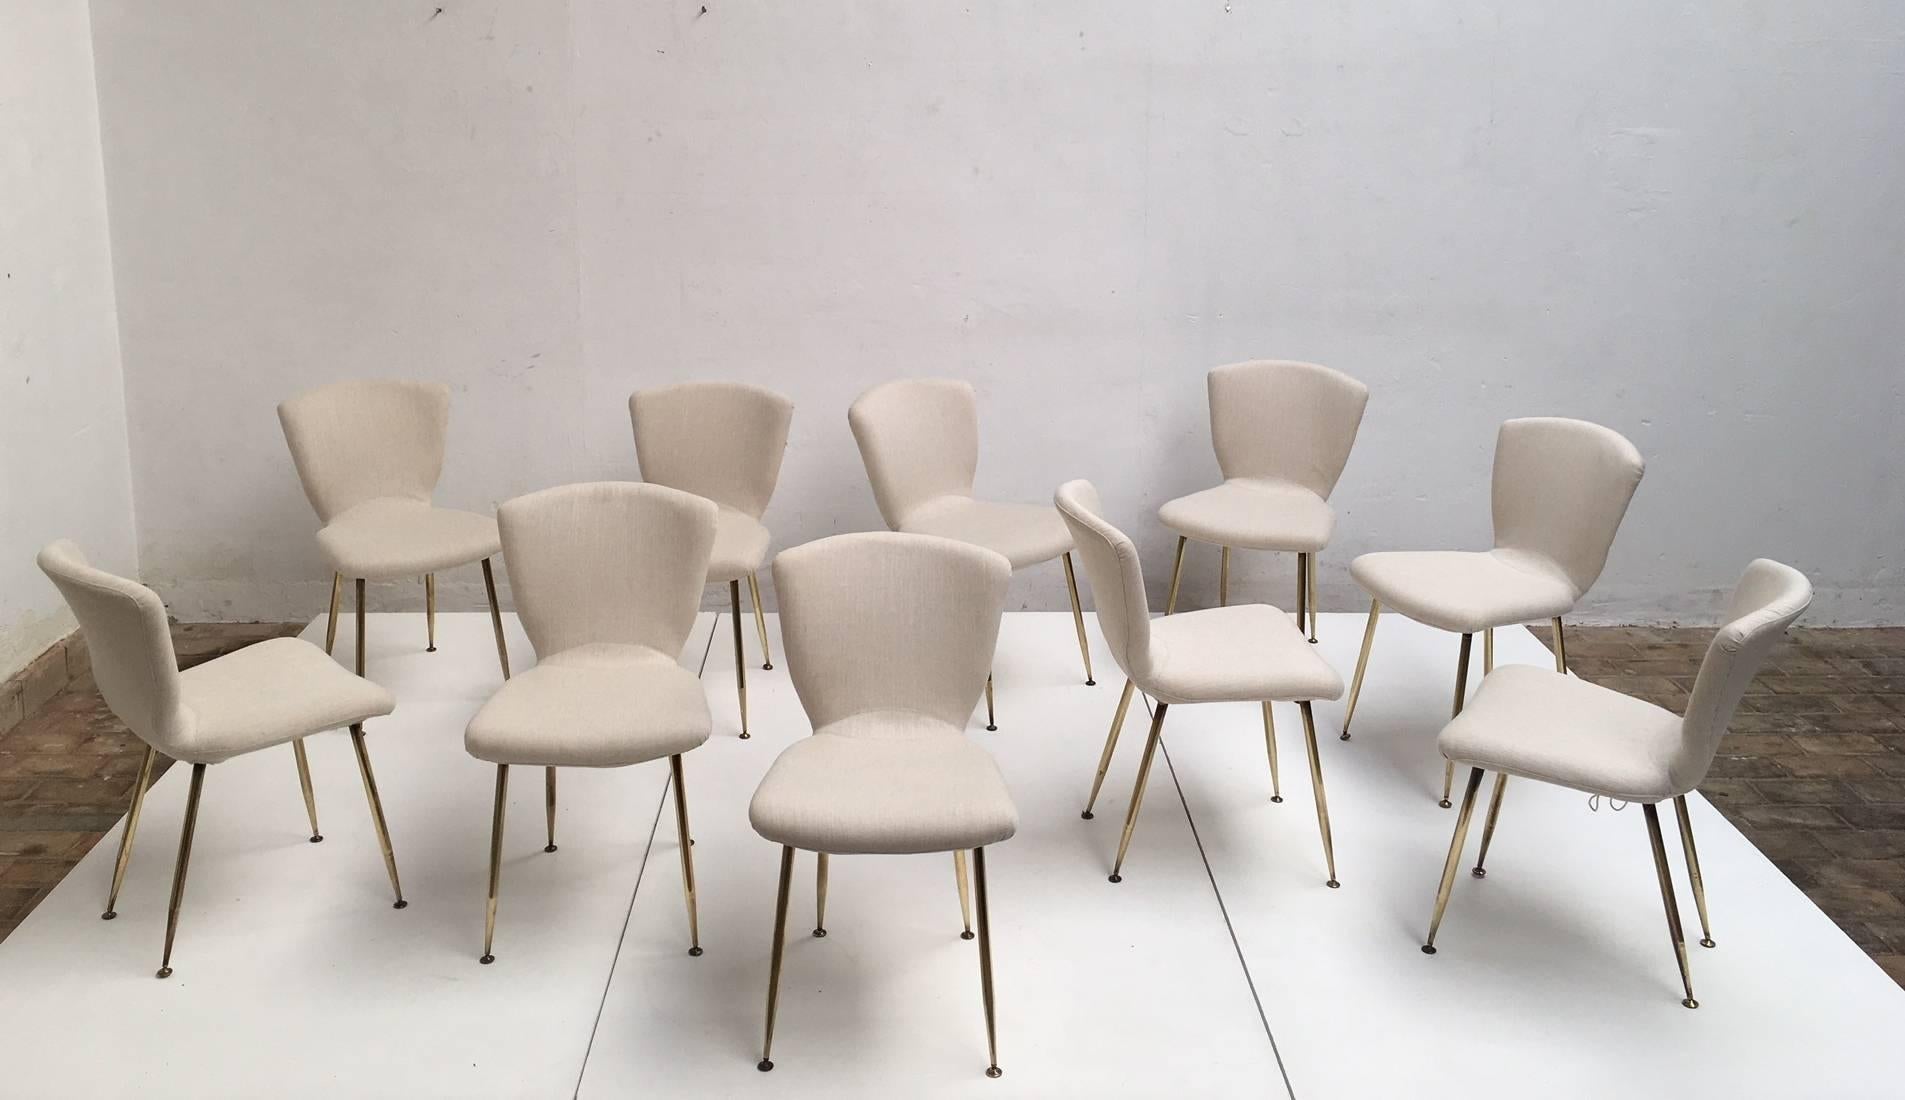 Italian 10 Dining Chairs by Louis Sognot for Arflex, 1959, brass legs, Upholstery Restored